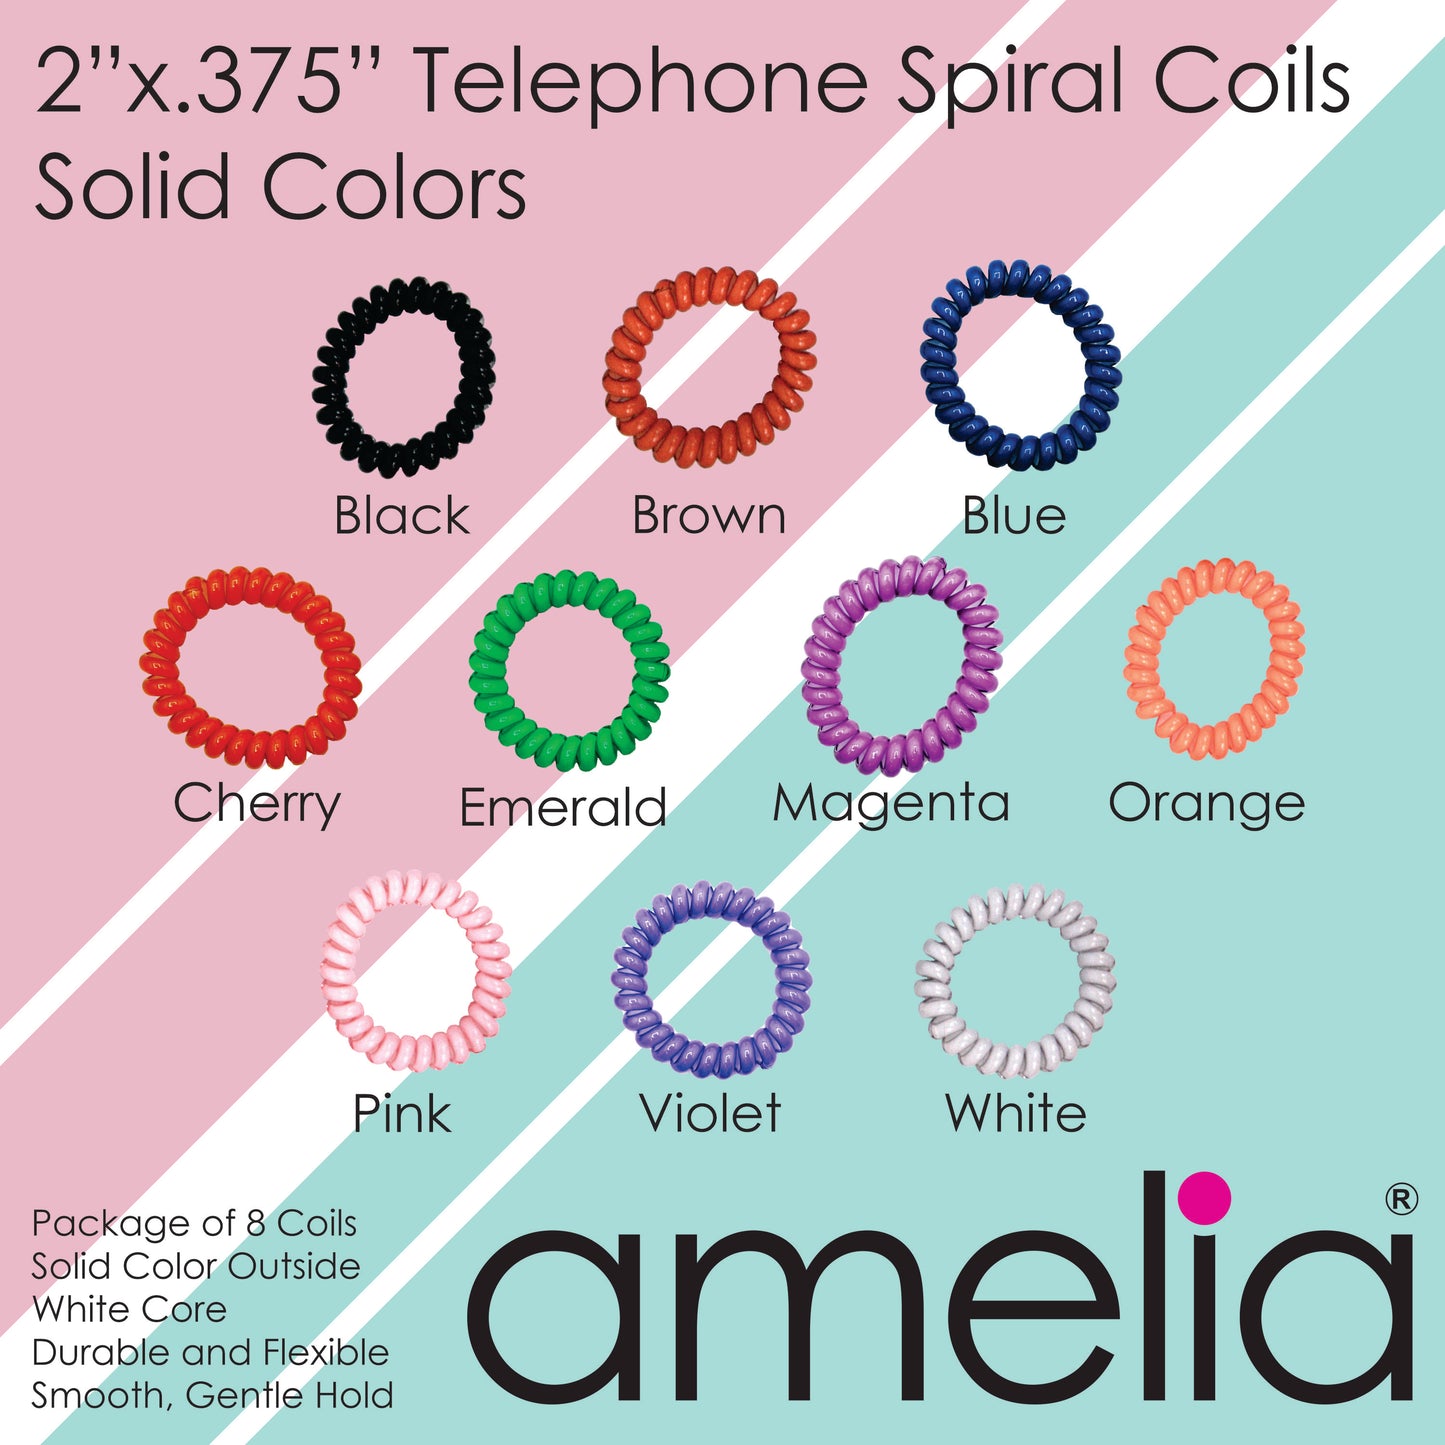 Amelia Beauty Products 8 Medium Elastic Hair Coils, 2.0in Diameter Thick Spiral Hair Ties, Gentle on Hair, Strong Hold and Minimizes Dents and Creases, Emerald and White Mix